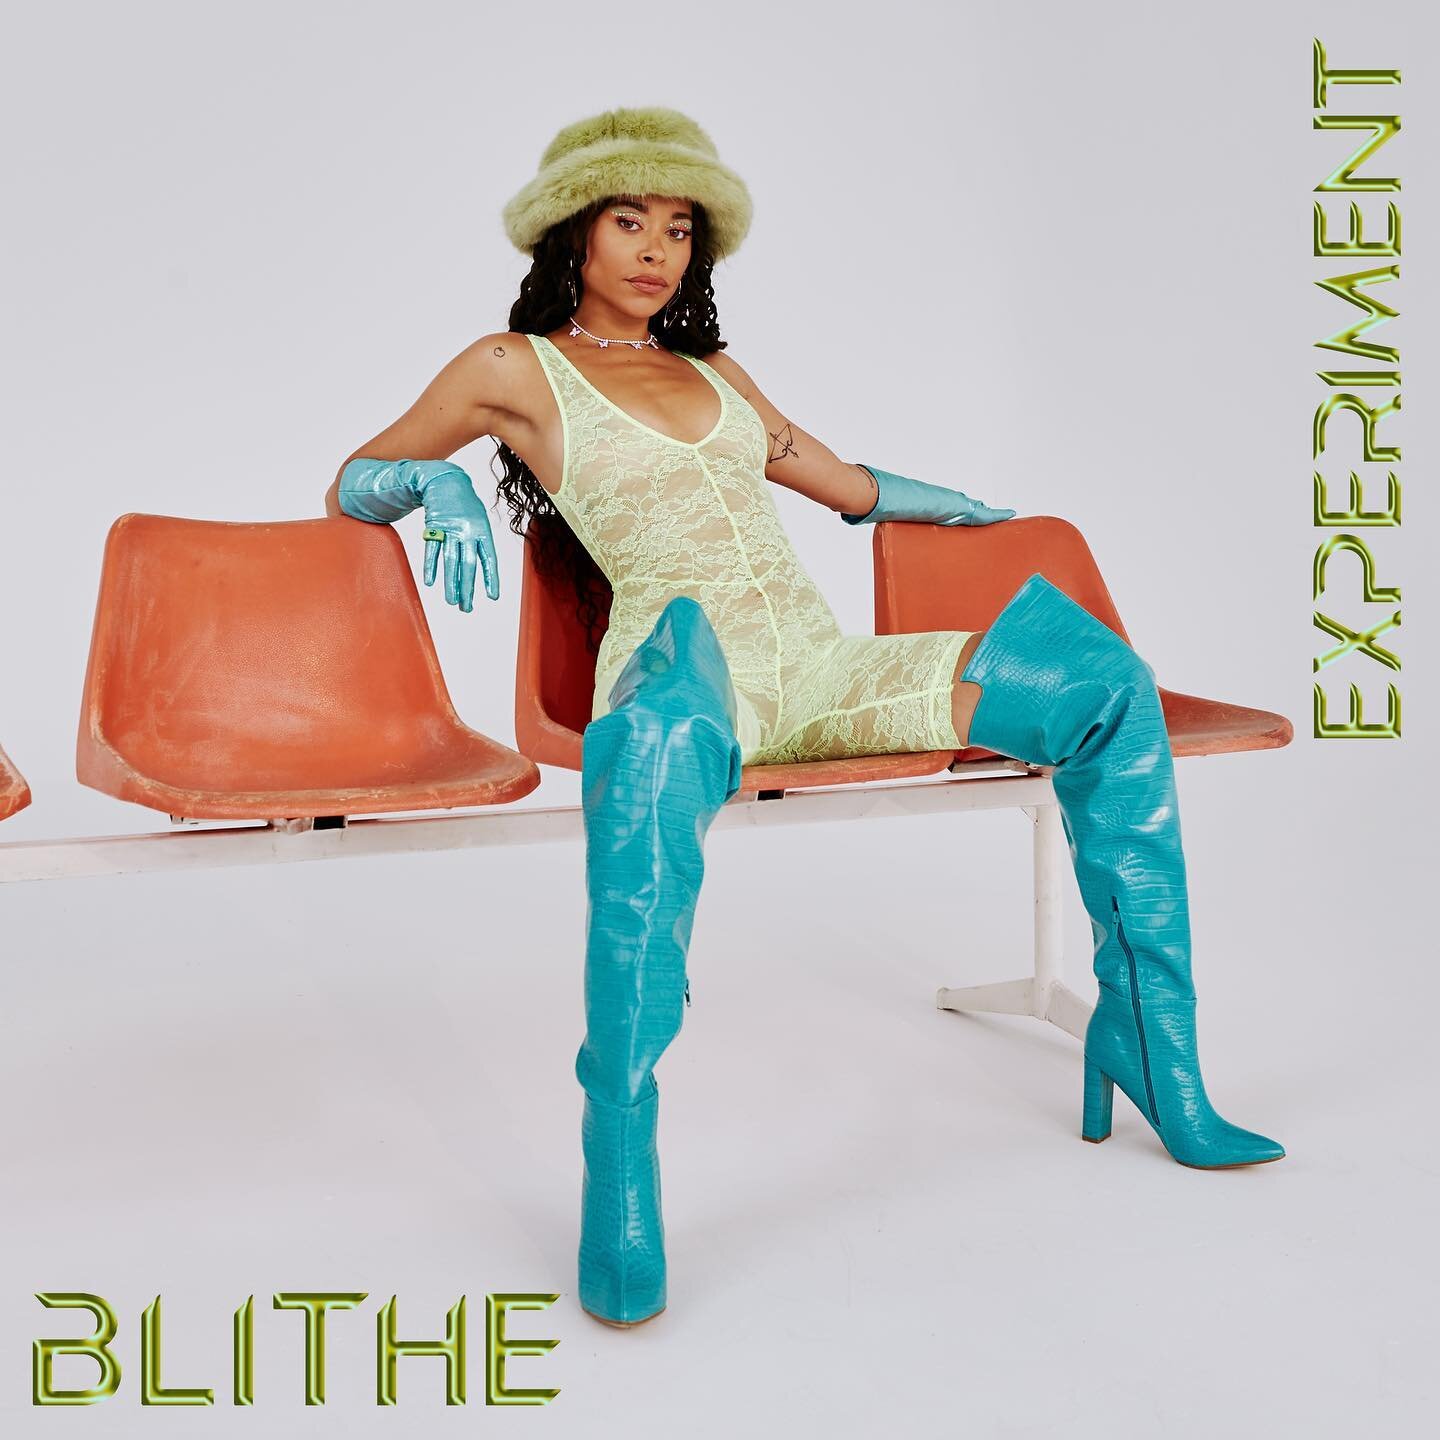 HEY HEY IT&rsquo;S RELEASE DAY

1. Prod and co-wrote &lsquo;Experiment&rsquo; with my queens @blithesaxon and @mickyblue 
2. &lsquo;Life Of The Party&rsquo; by my friend @ellaisaacson , prod by 🙋🏻&zwj;♂️